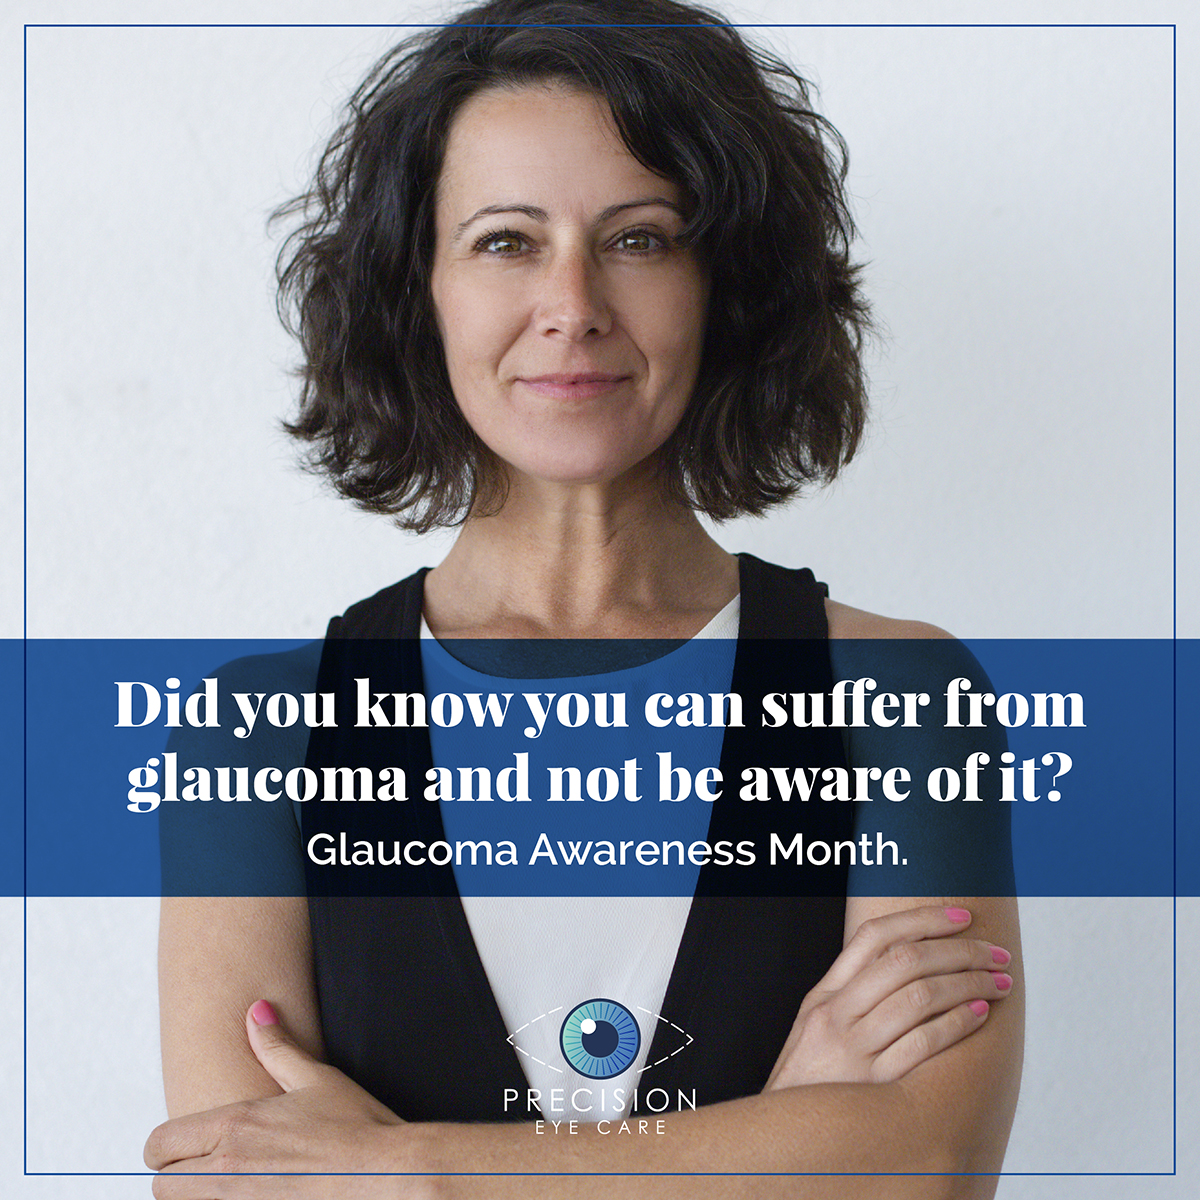 Did you know you can suffer from glaucoma and not be aware of it?